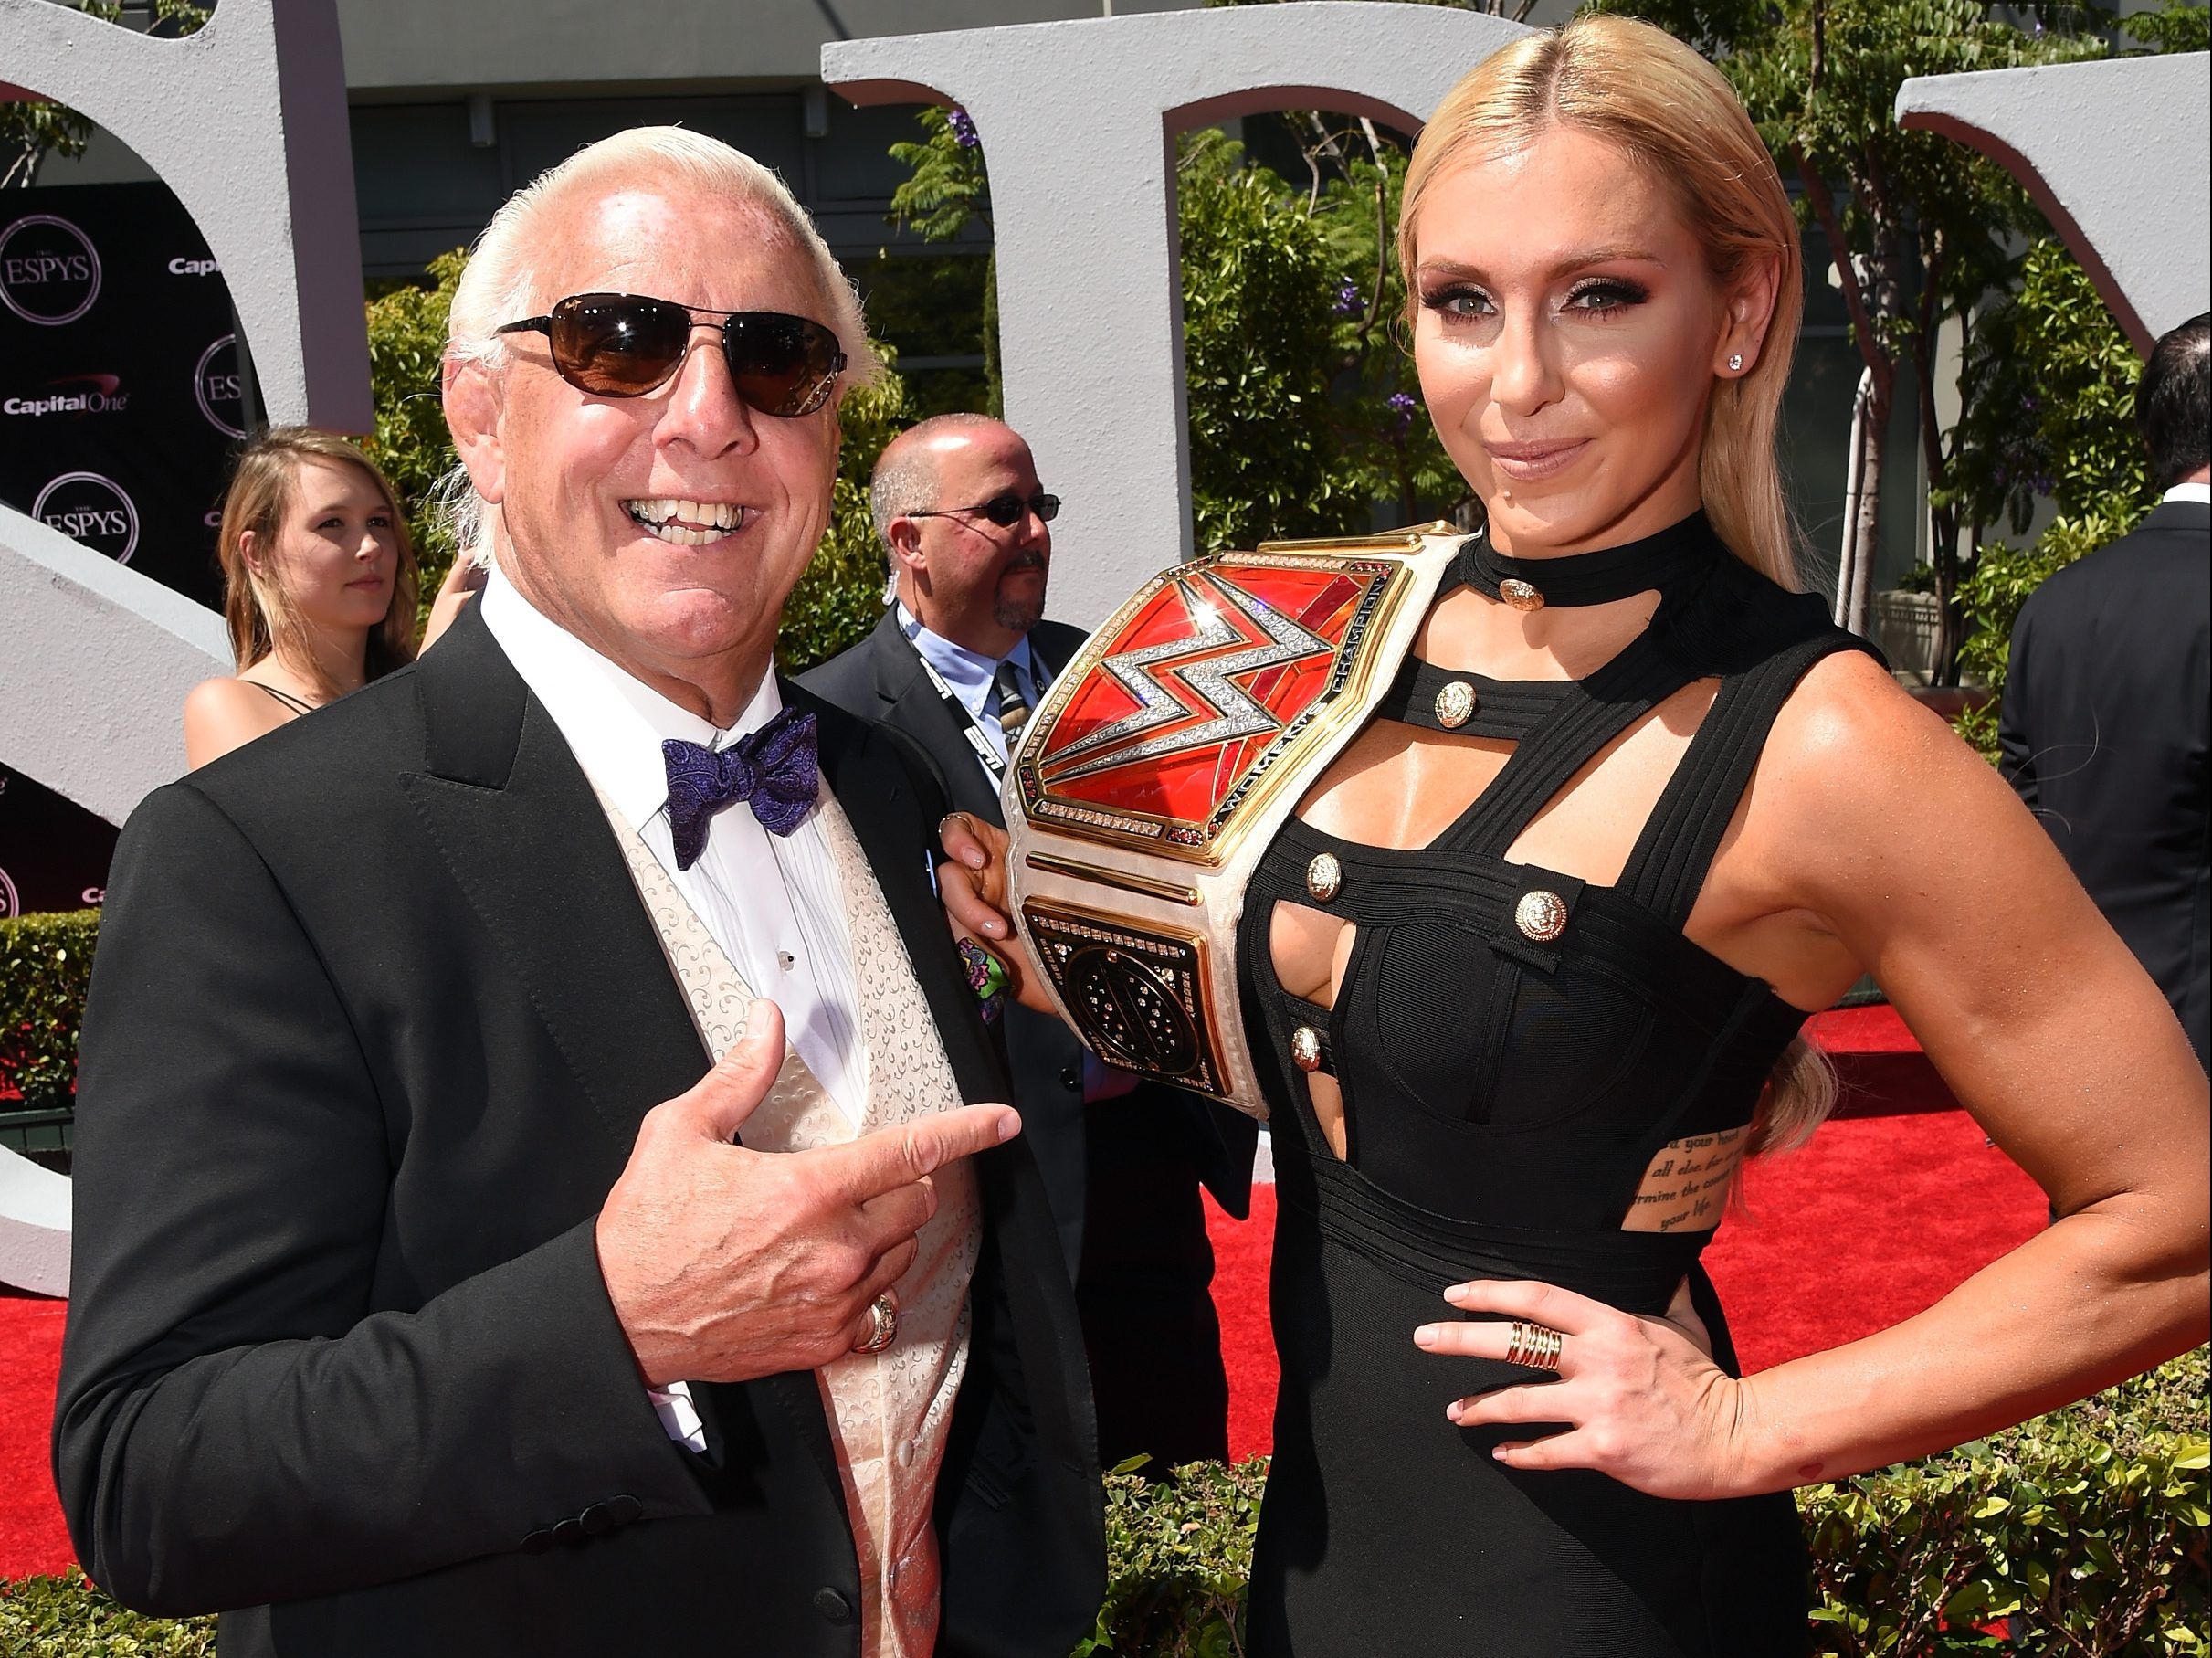 Ric Flair: I Could Wrestle Again And I'd Be Better Than I Was In The Last  Match